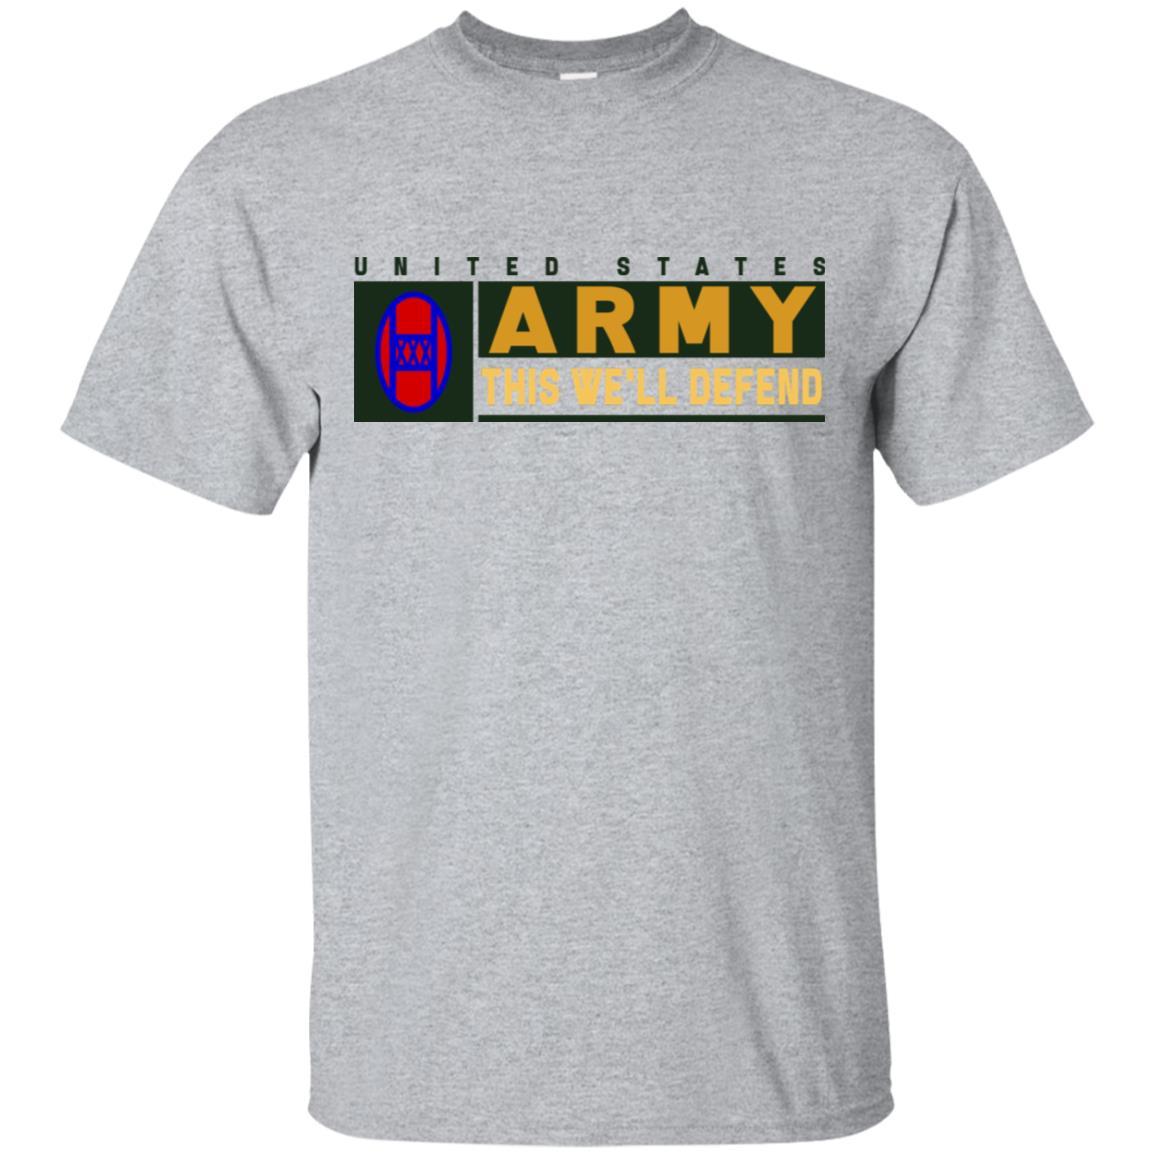 US Army 30TH ARMORED BRIGADE COMBAT TEAM- This We'll Defend T-Shirt On Front For Men-TShirt-Army-Veterans Nation